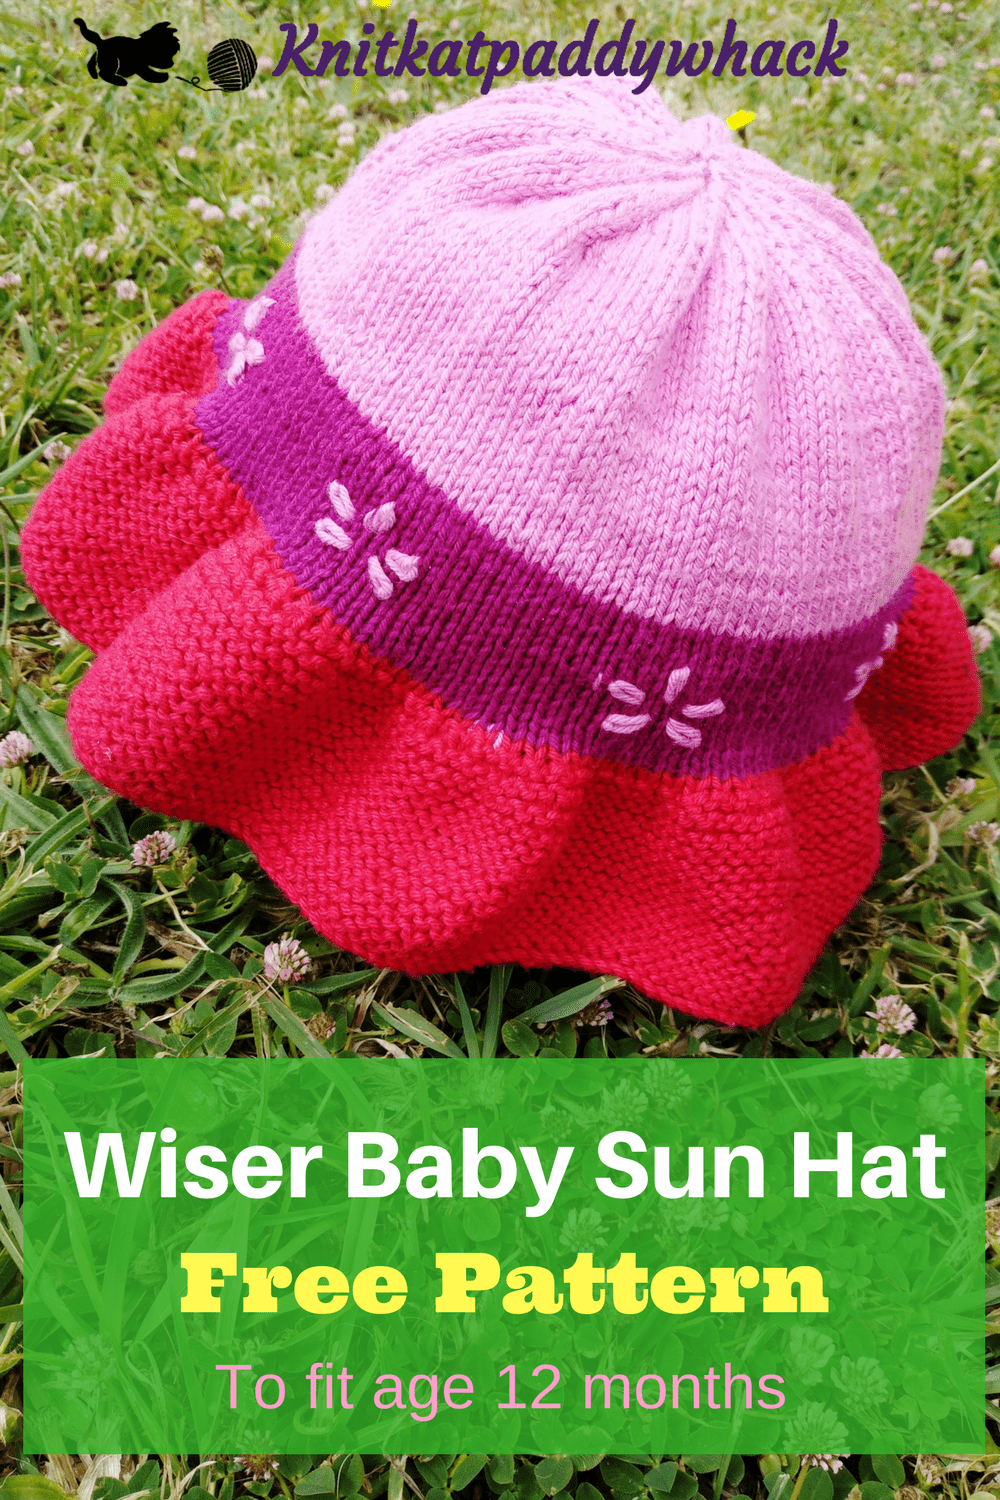 Wiser Baby Sun Hat photo with text